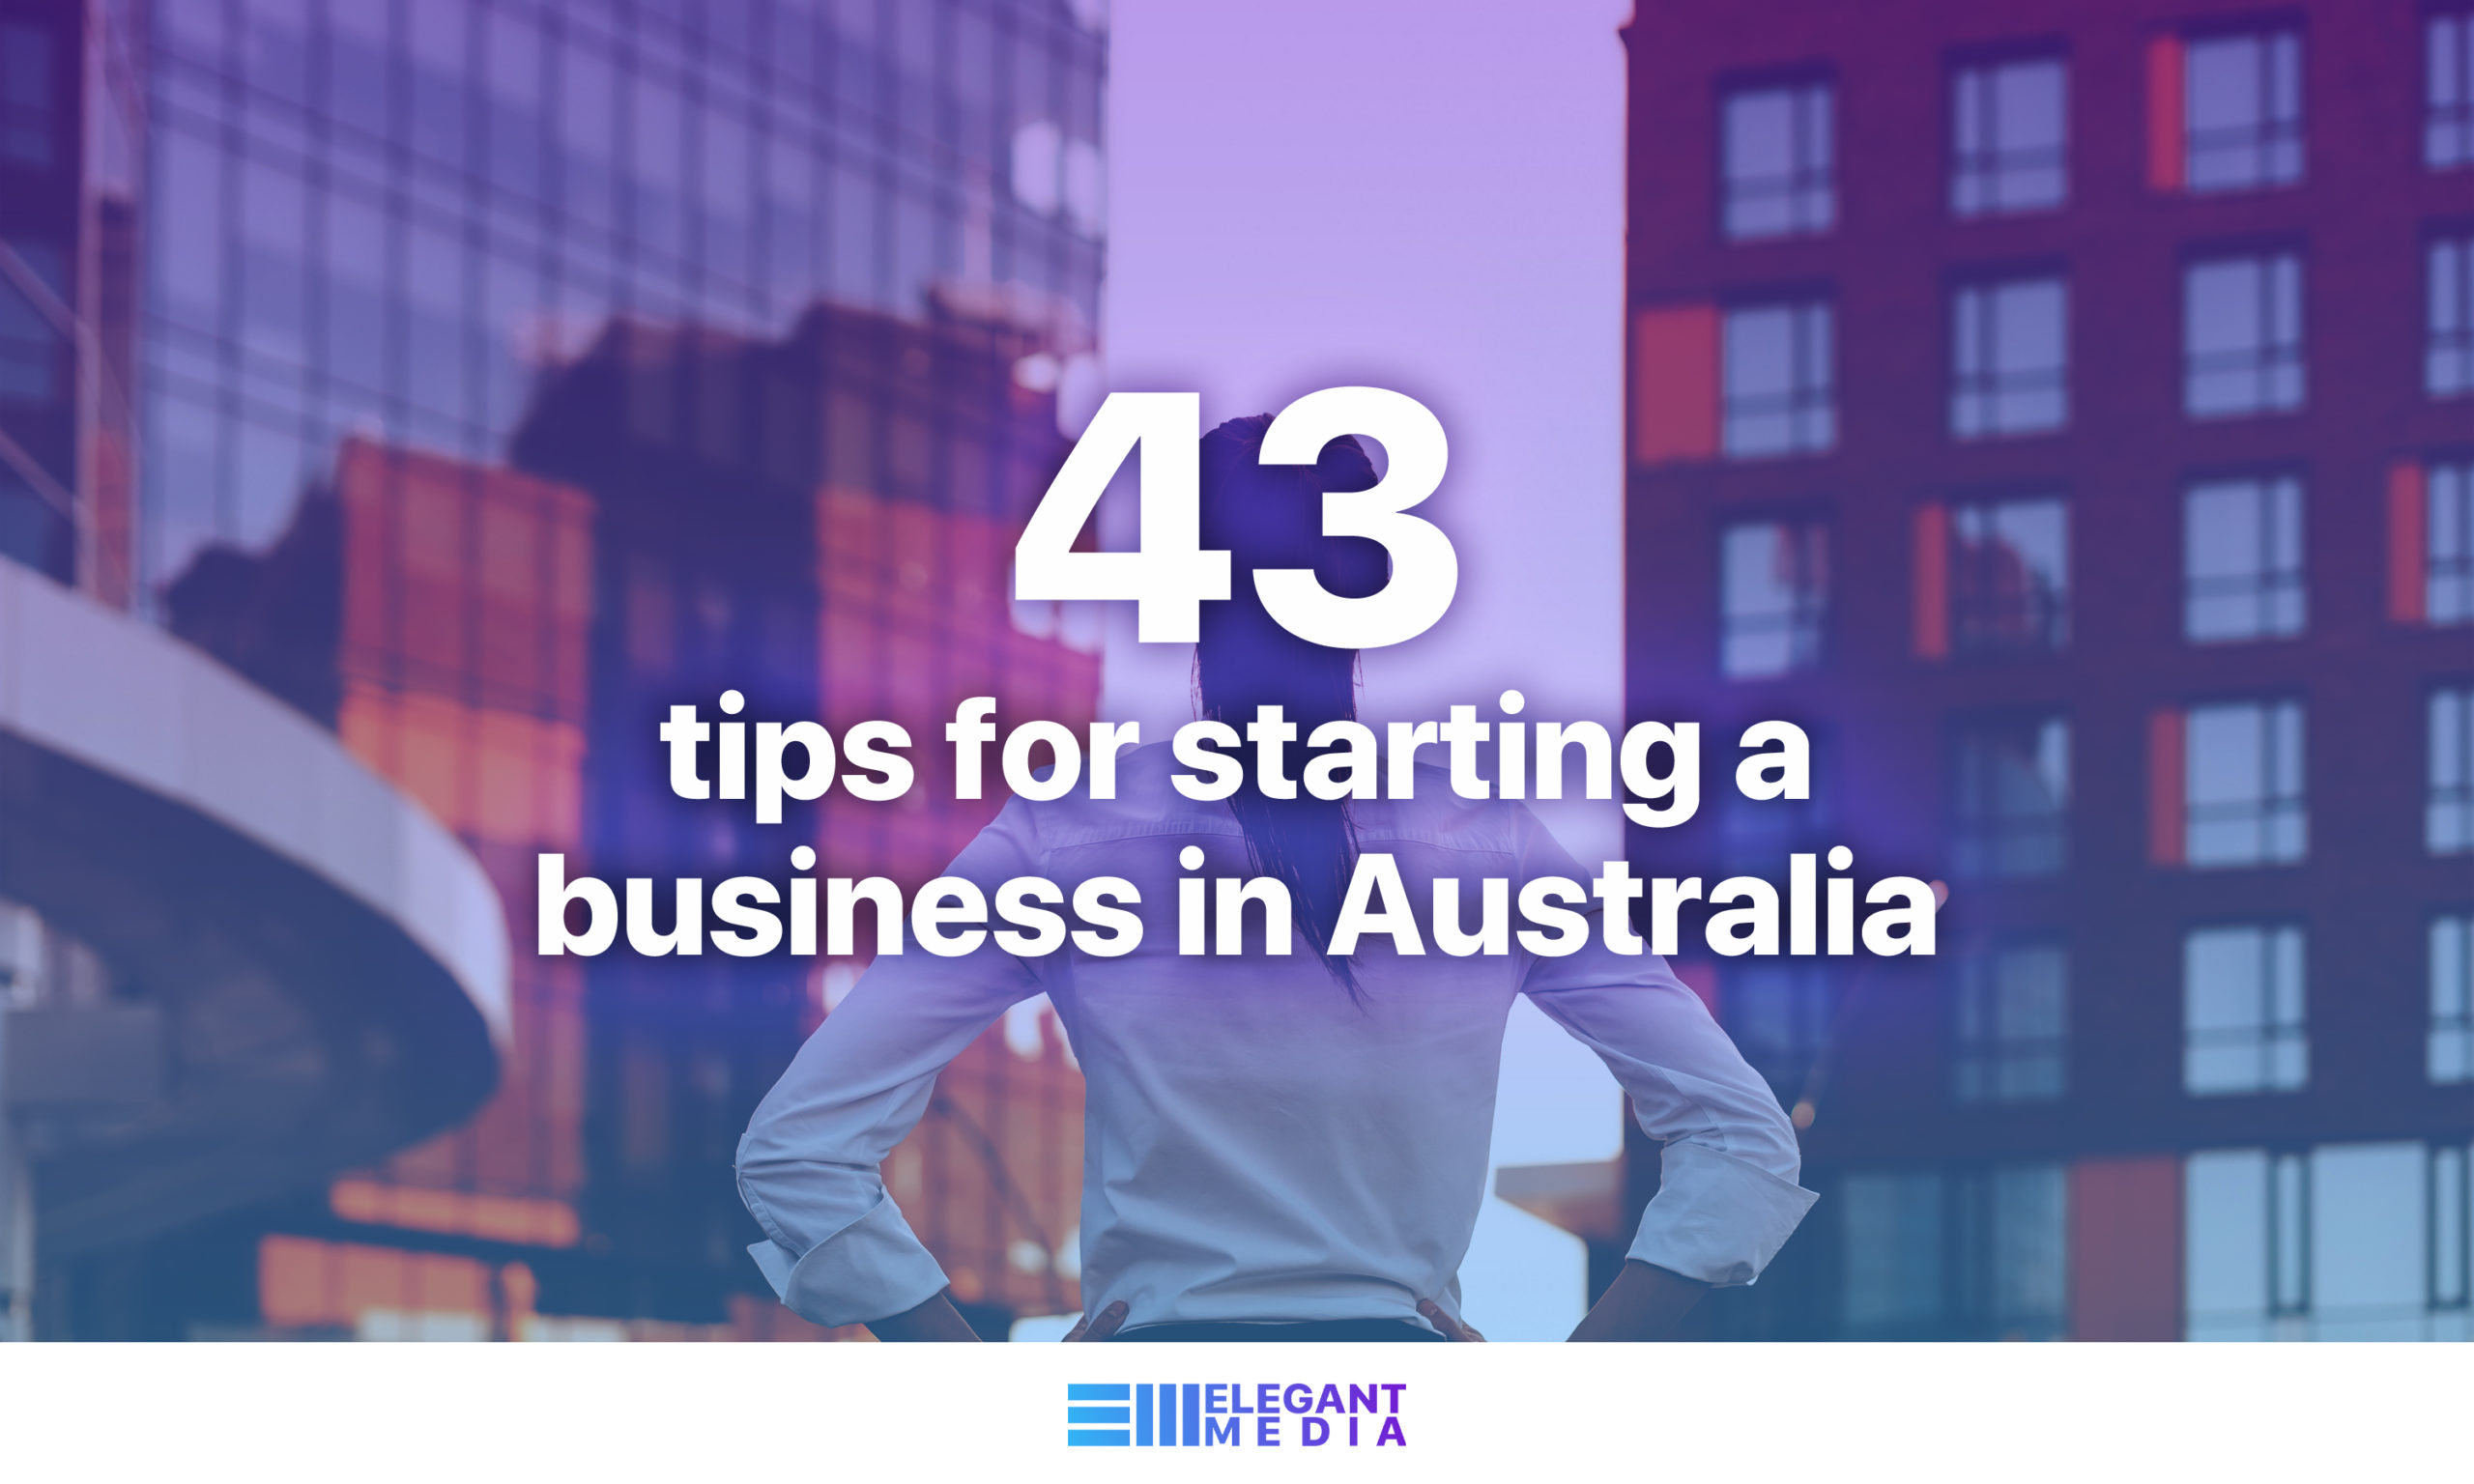 43 tips for starting a business in Australia